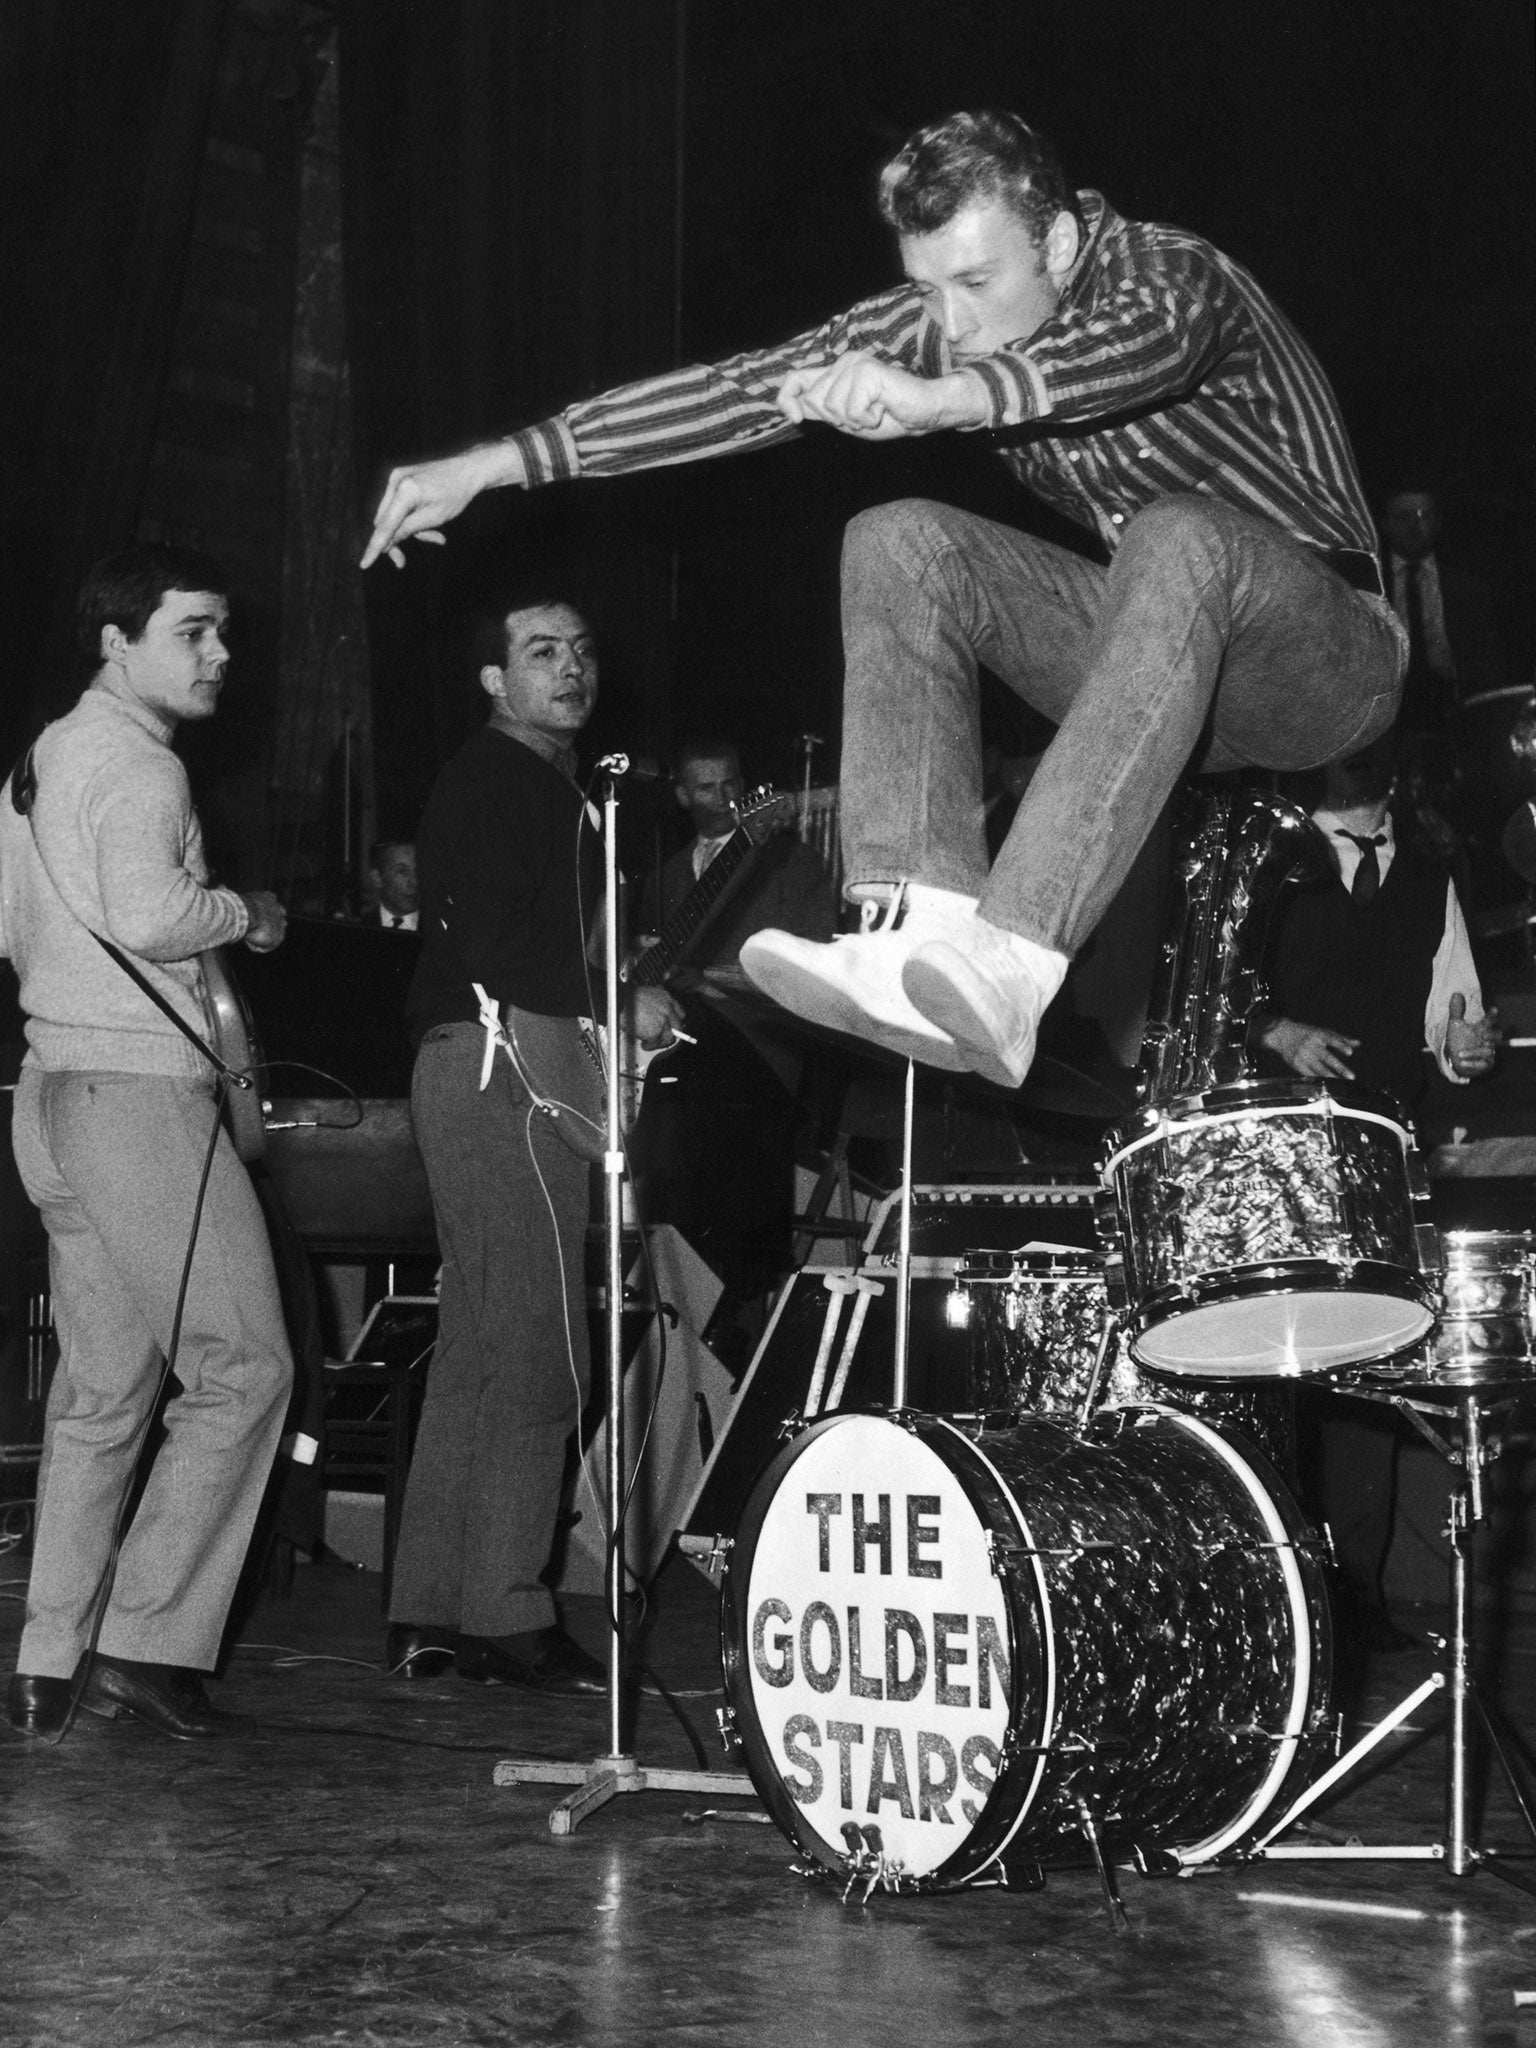 Hallydaywith his group The Golden Stars in 1962